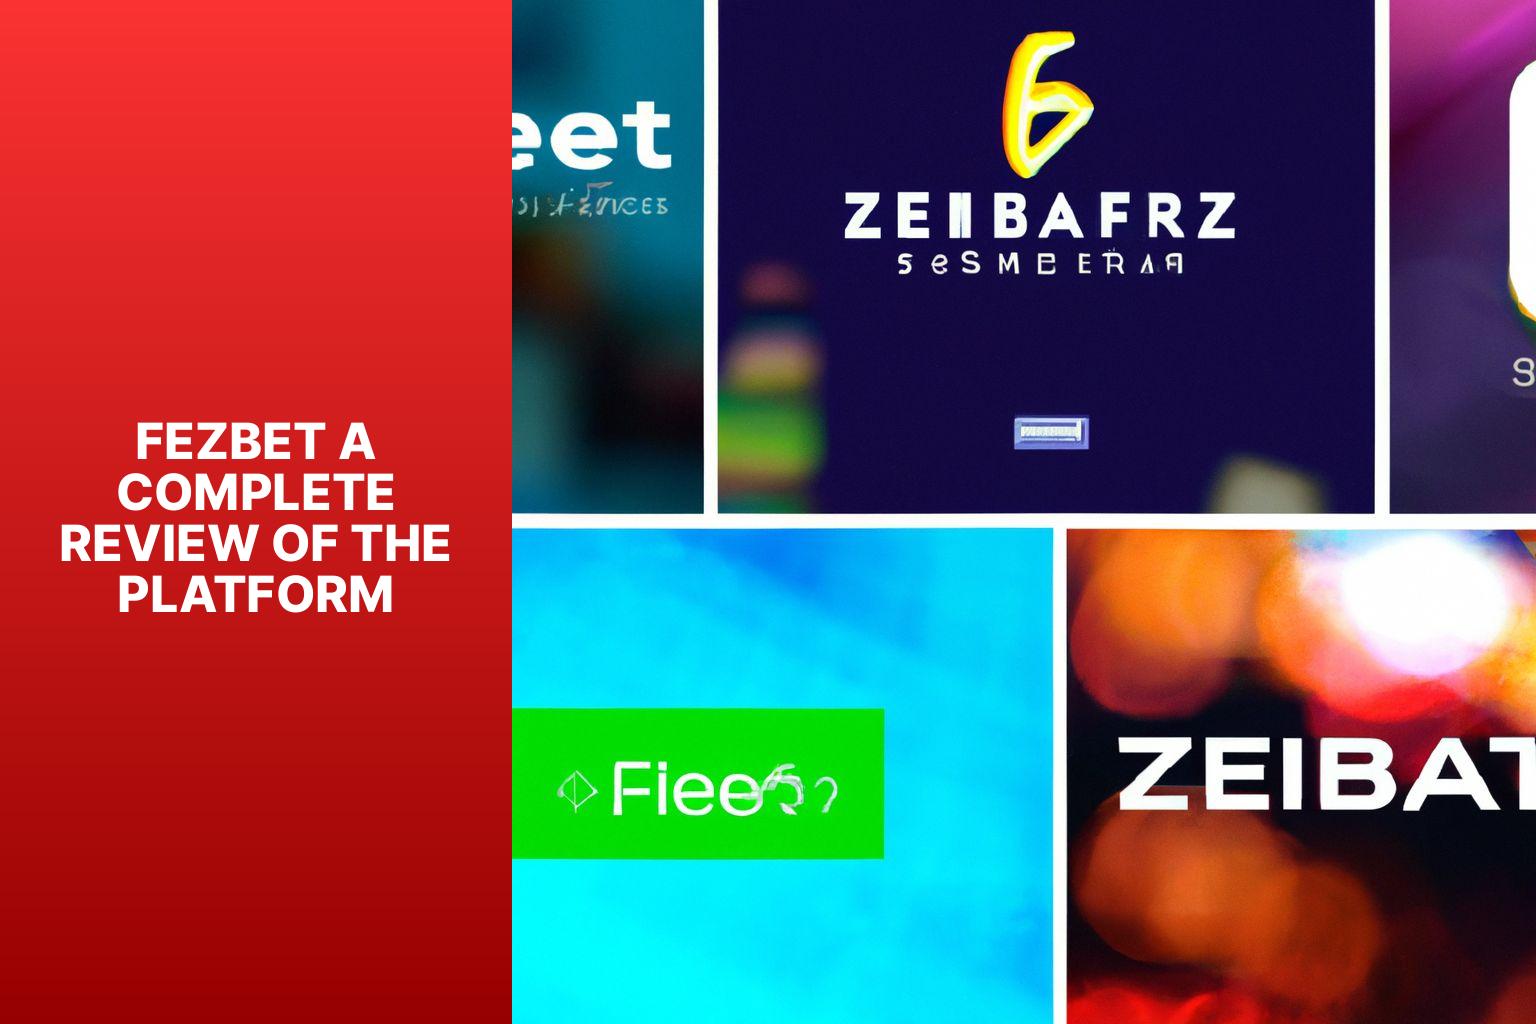 FezBet A Complete Review of the Platform